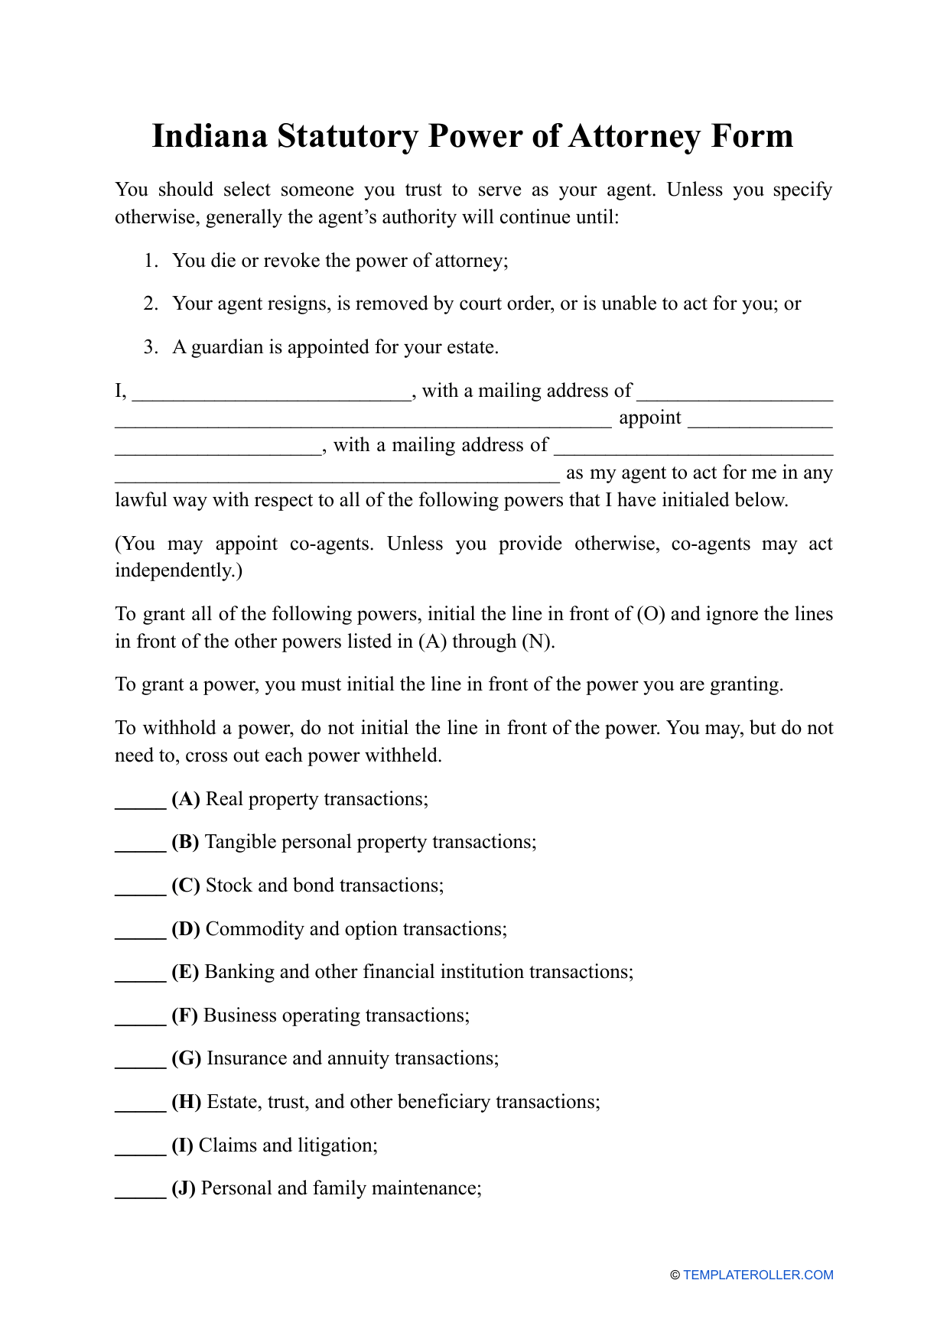 Statutory Power of Attorney Form - Indiana, Page 1